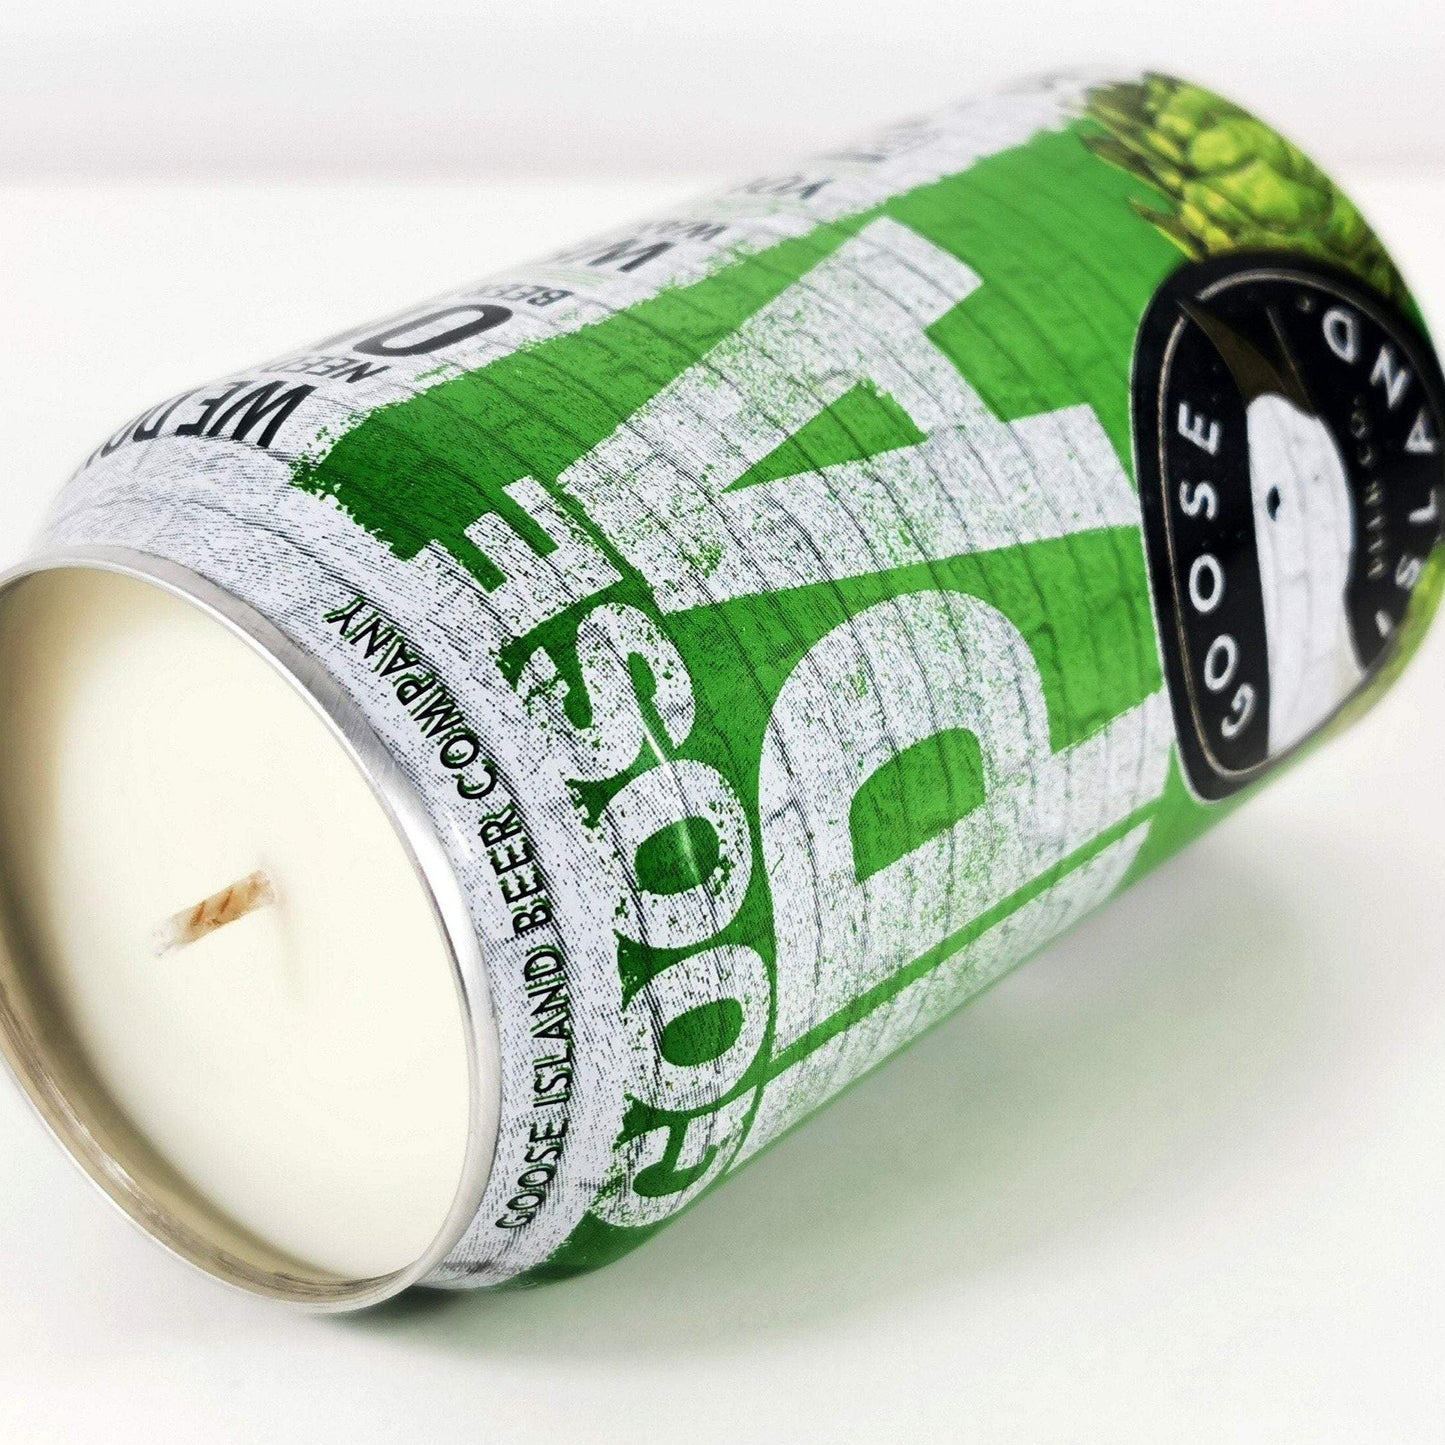 Goose IPA Craft Beer Can Candle-Beer Can Candles-Adhock Homeware